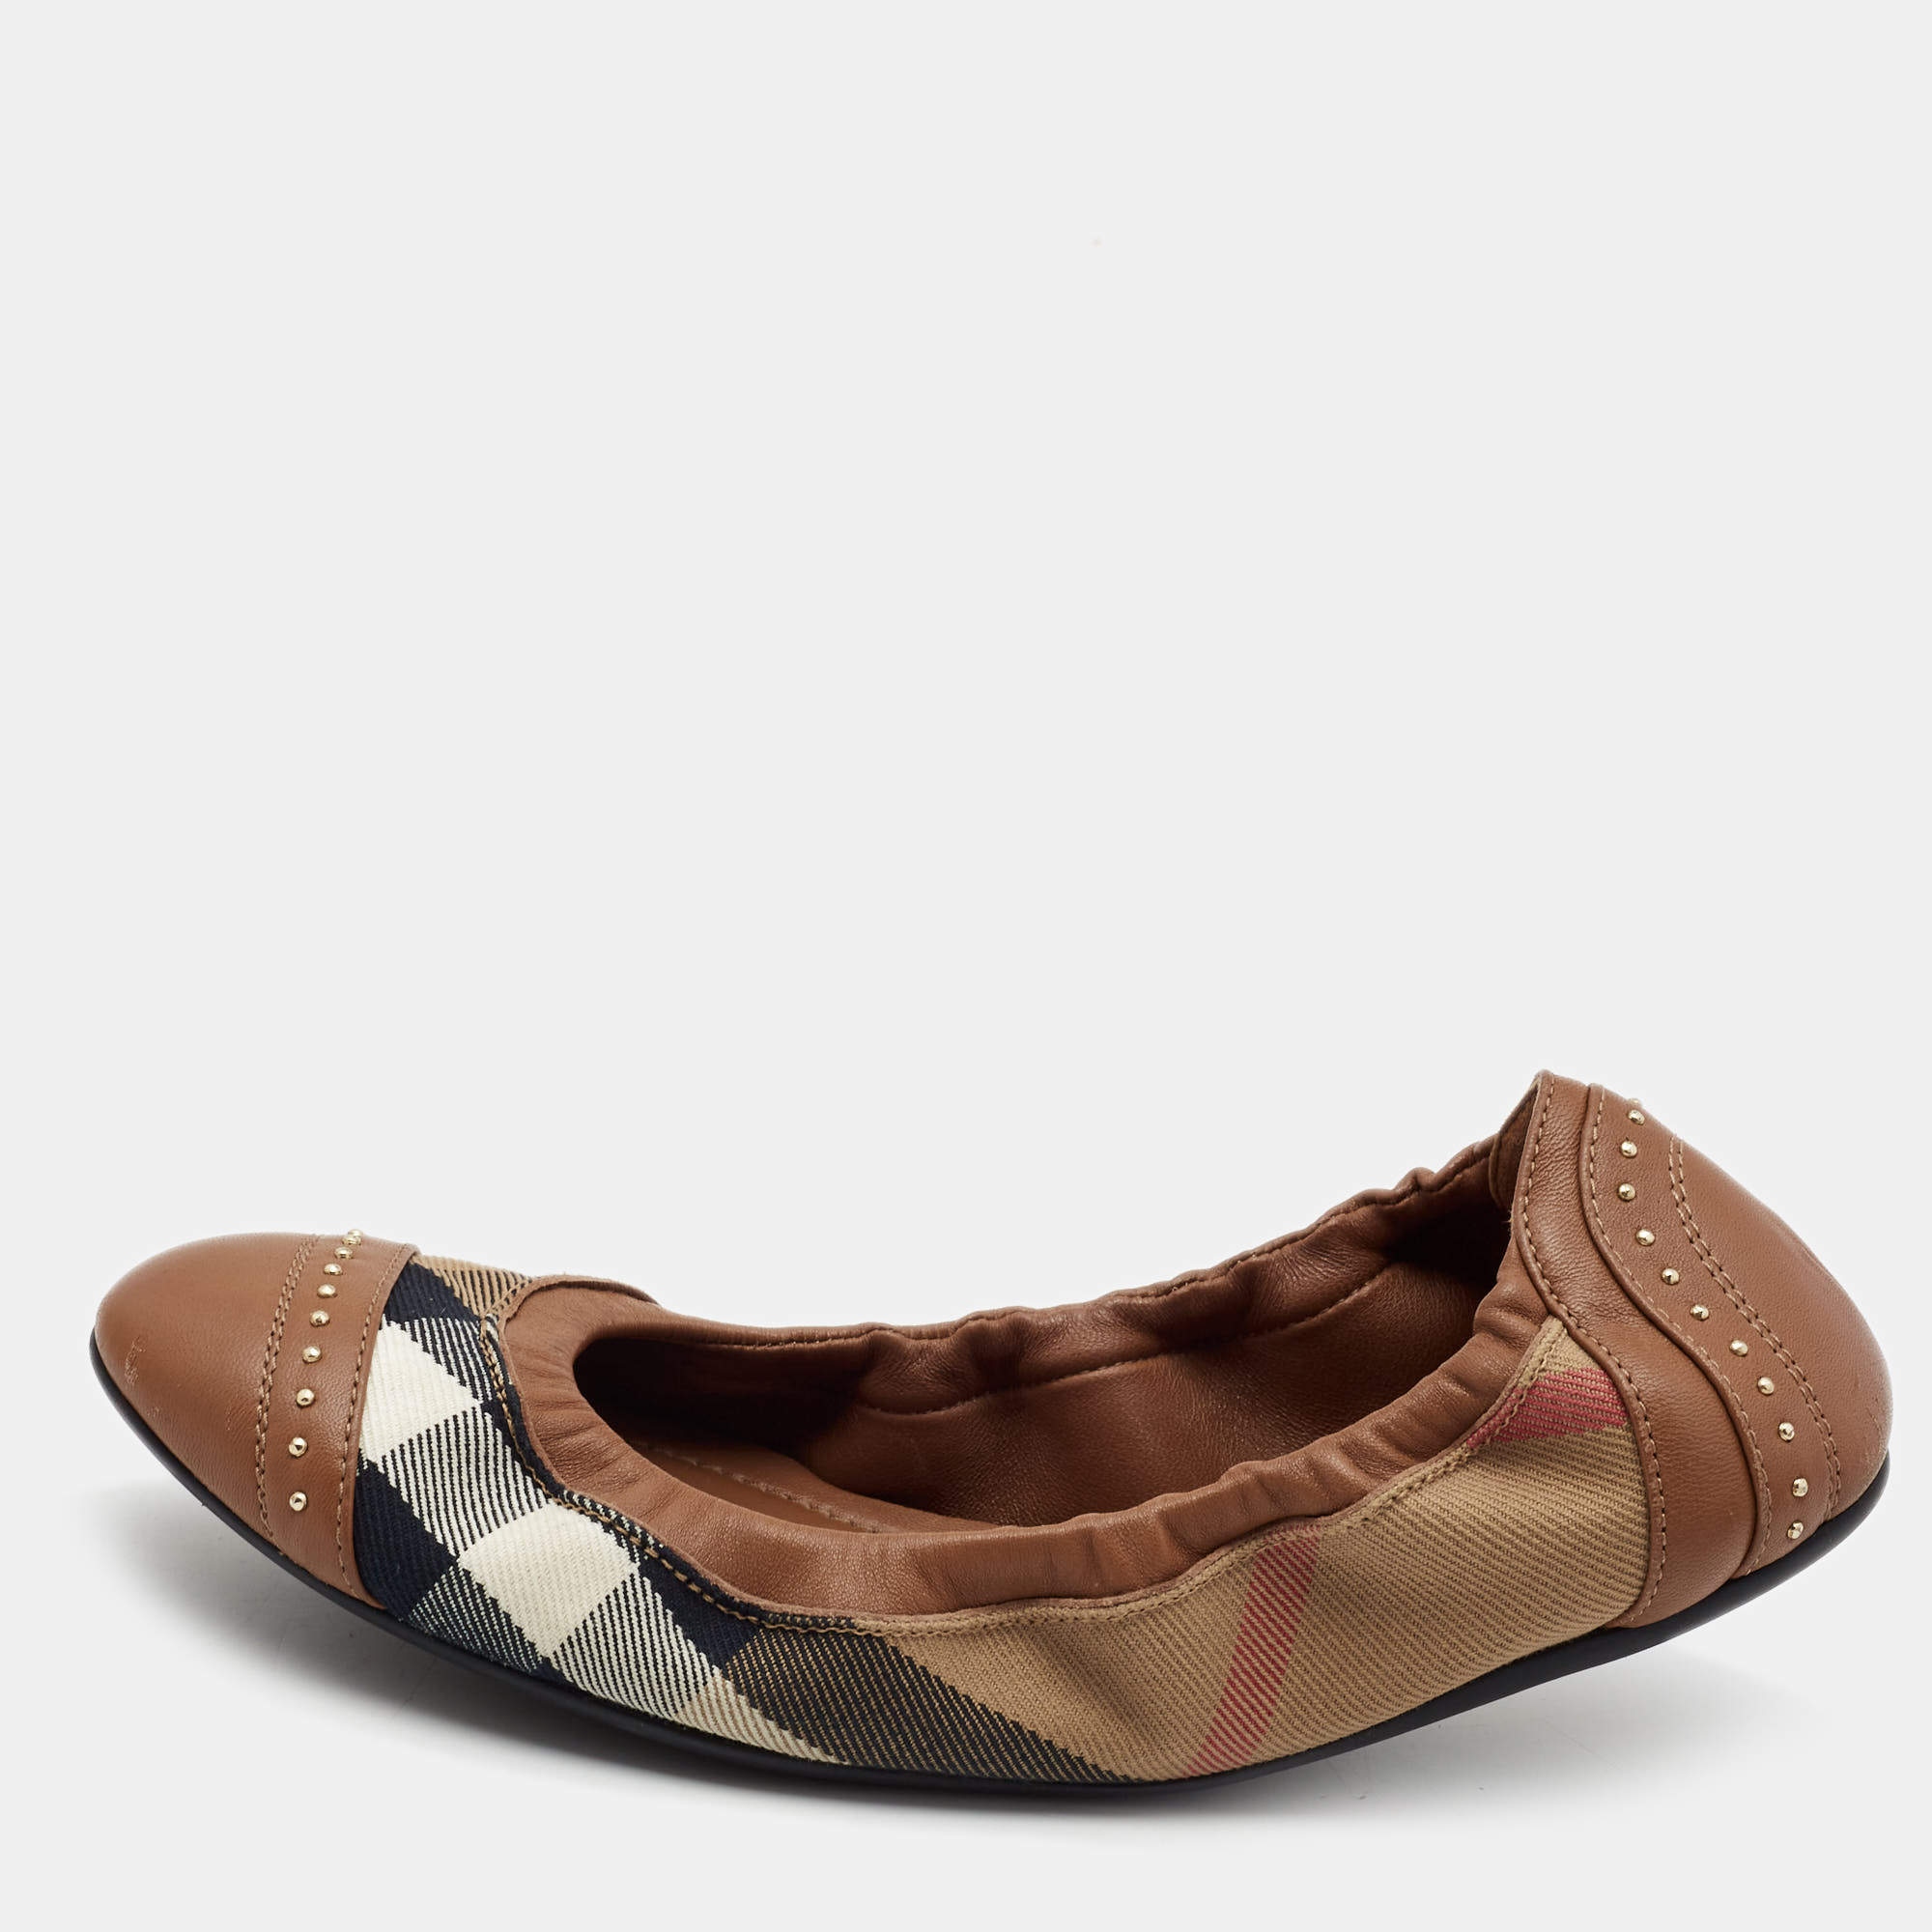 Uitrusten rommel metro Burberry Brown Leather and Nova Check Canvas Studded Scrunch Ballet Flats  Size 36.5 Burberry | TLC